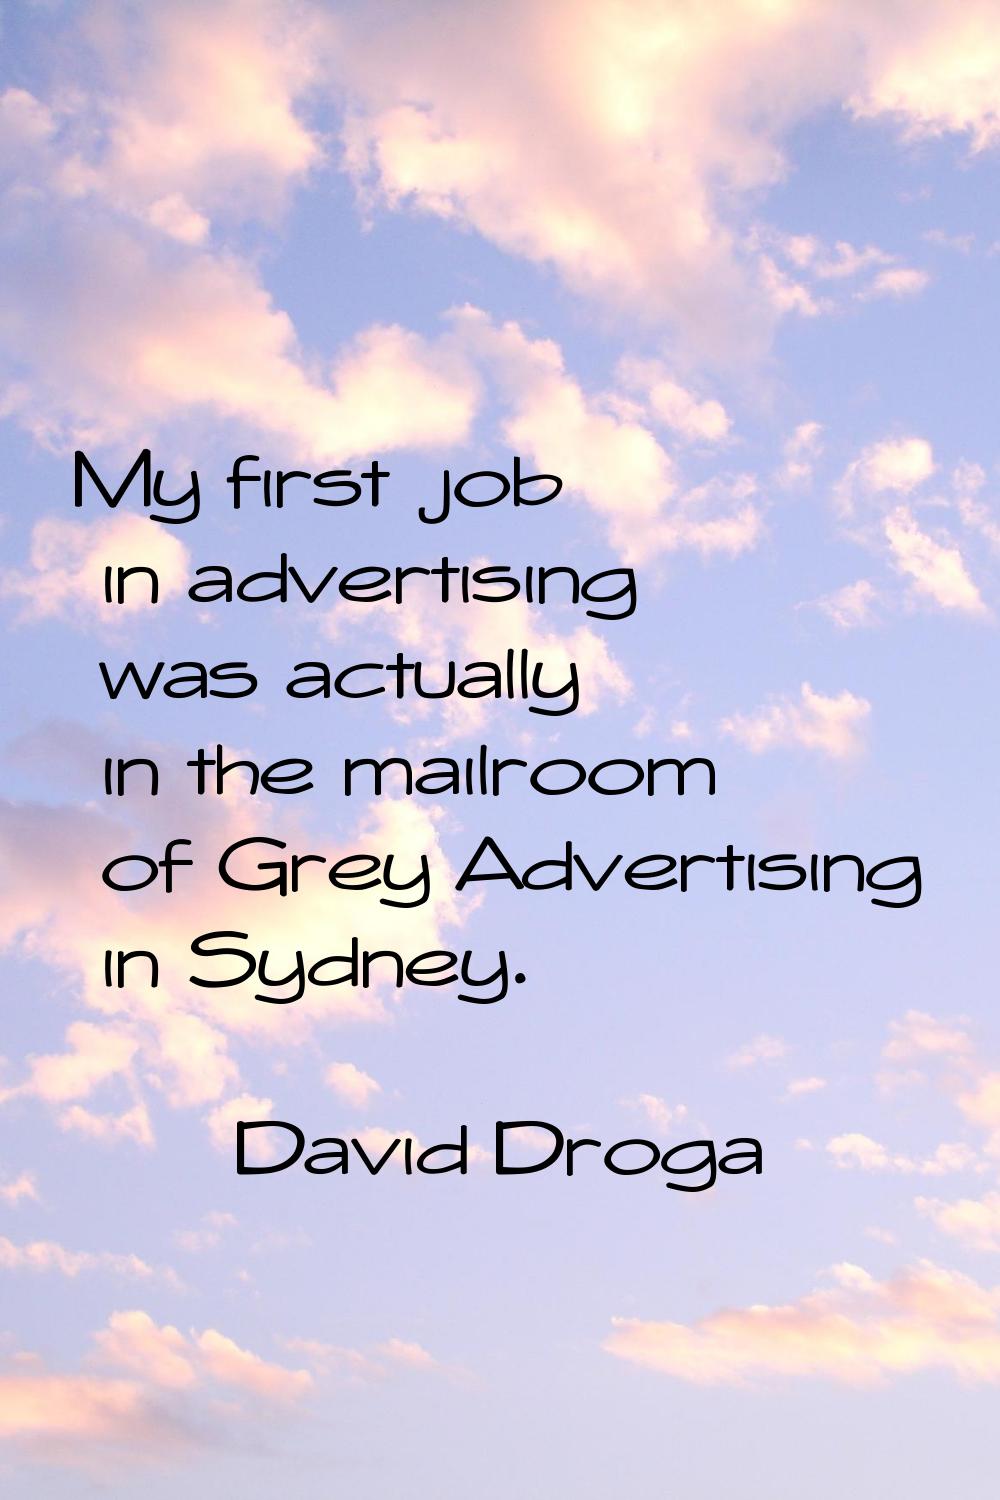 My first job in advertising was actually in the mailroom of Grey Advertising in Sydney.